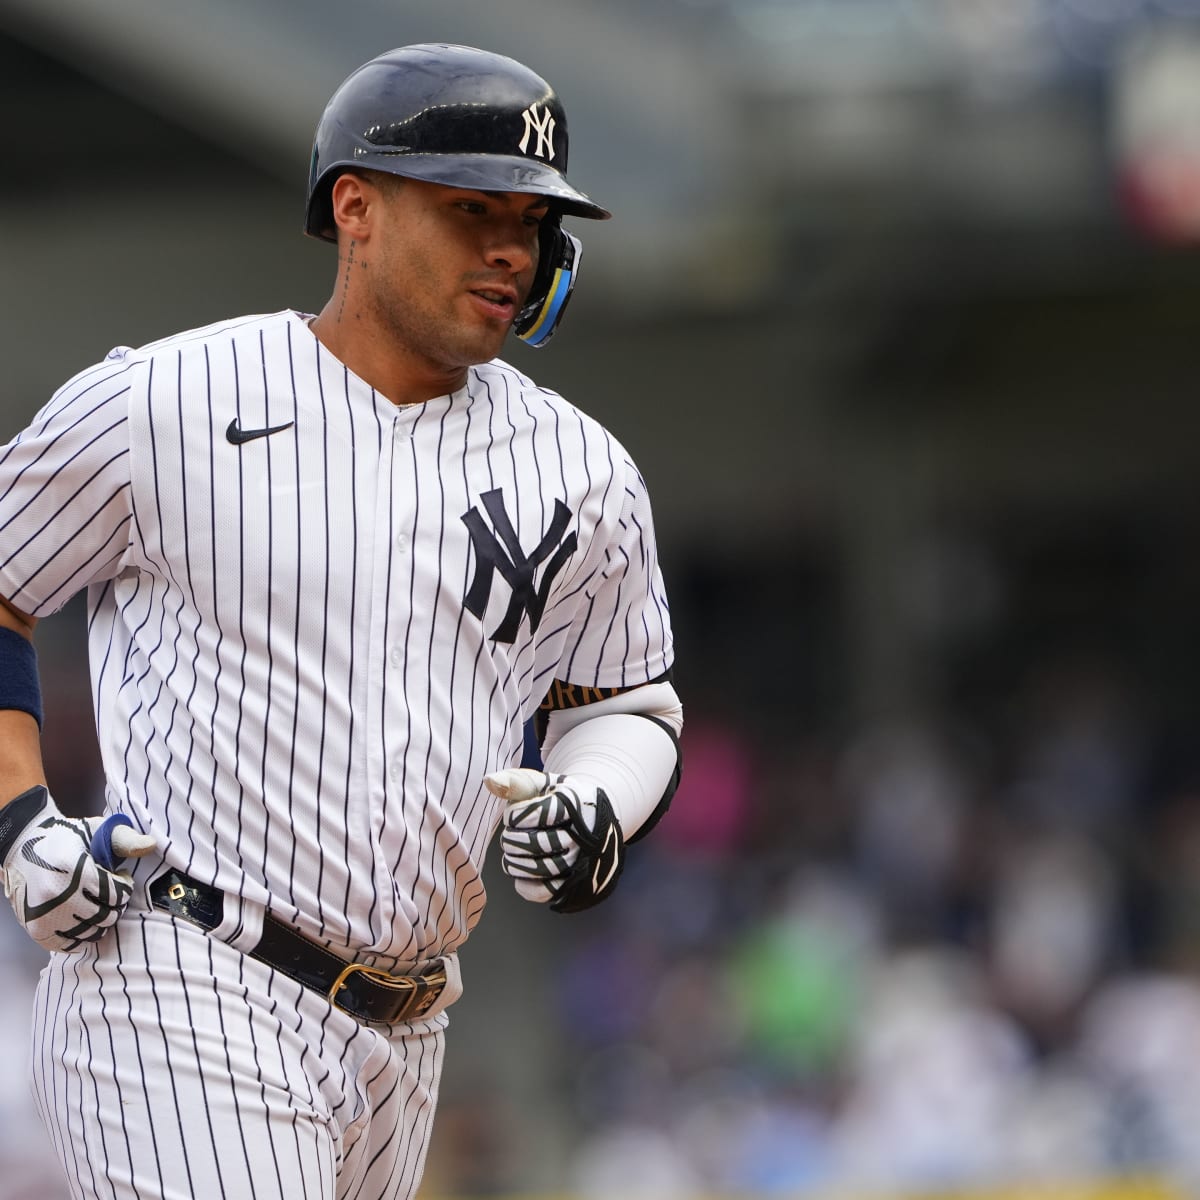 Yankees 2B Gleyber Torres Gets Revenge on Guardians DH Josh Naylor With  Rock the Baby Celebration - Sports Illustrated NY Yankees News, Analysis  and More